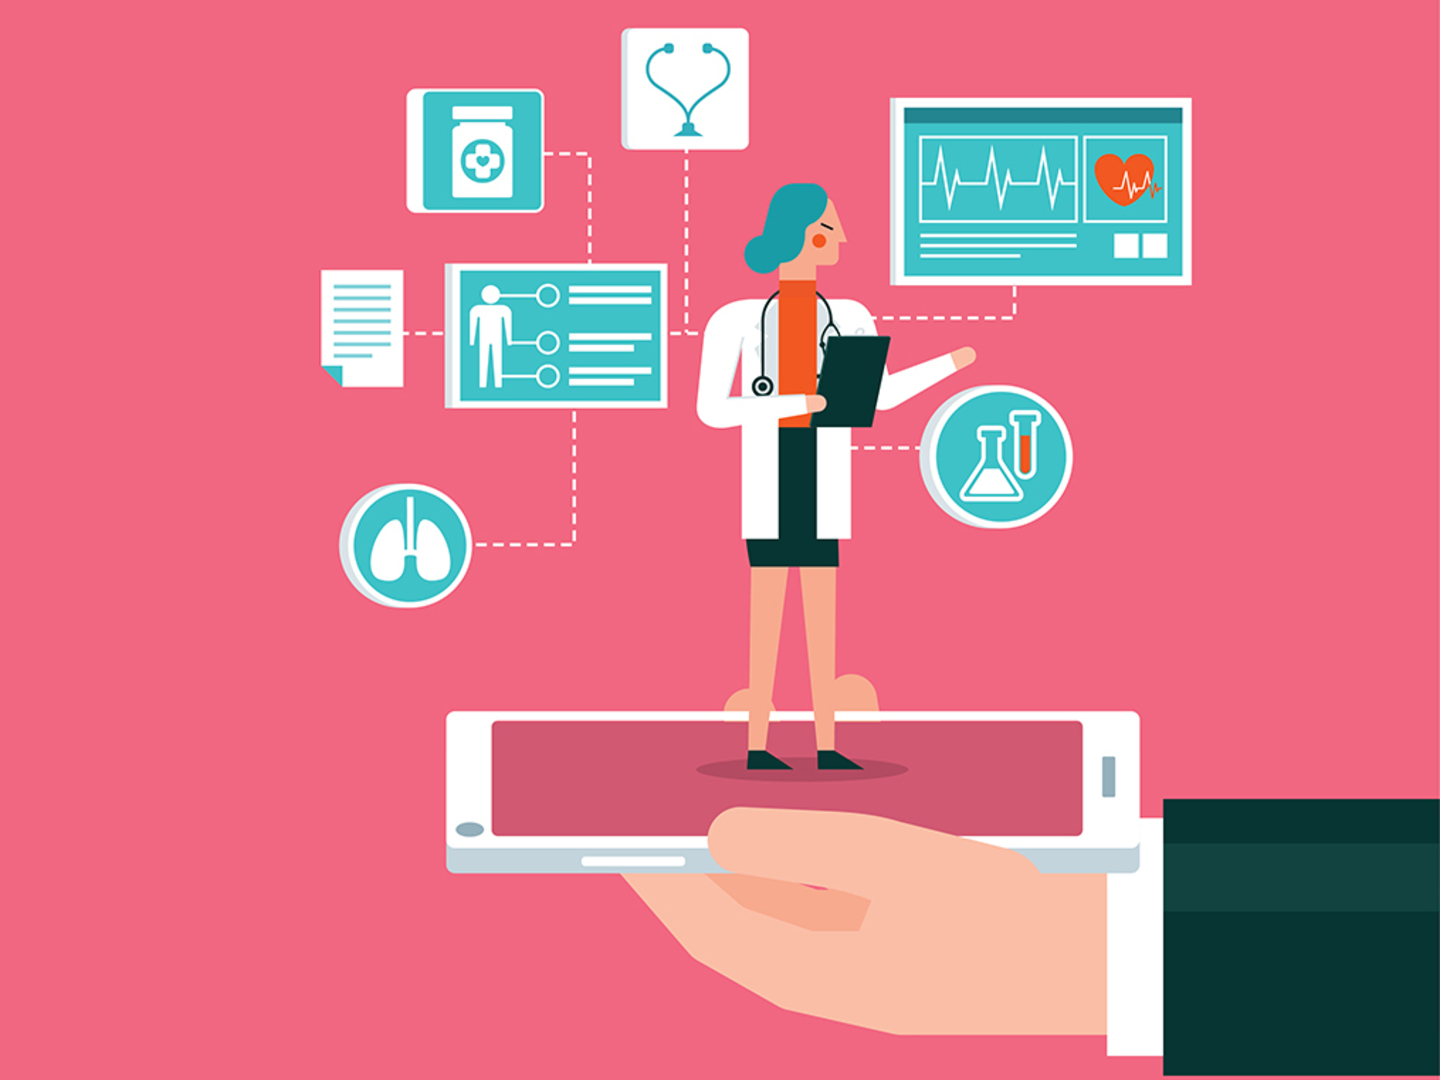 Real-time data analytics to patient-care coordination: Digital platforms can transform healthcare